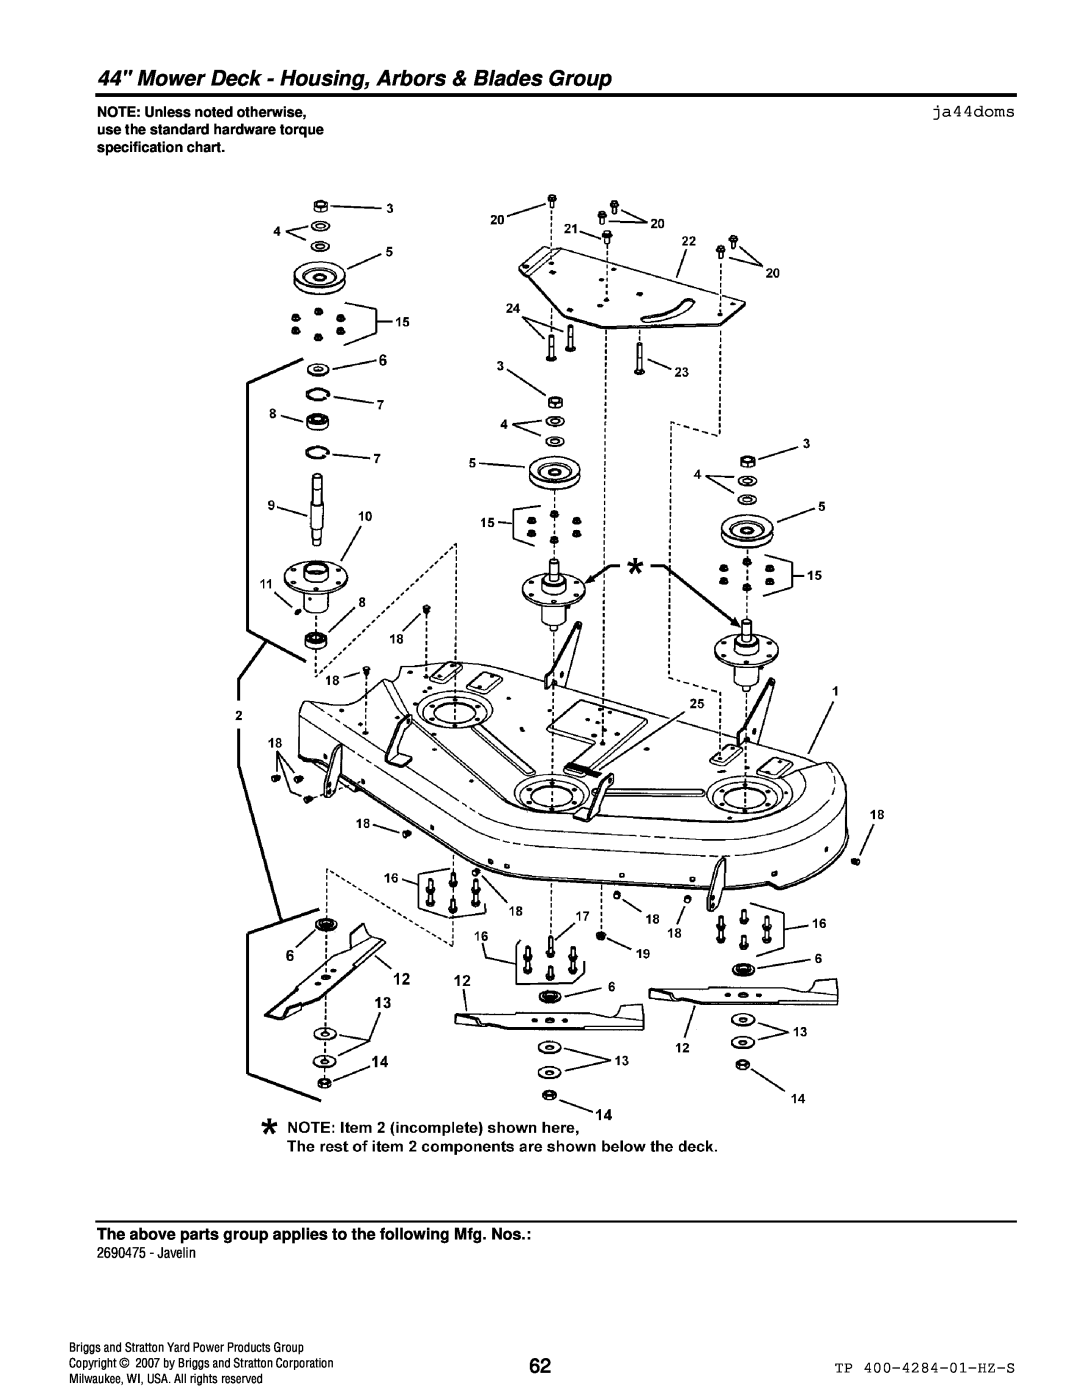 Simplicity TP 400-4284-01-HZ-S manual Mower Deck - Housing, Arbors & Blades Group, ja44doms, NOTE: Unless noted otherwise 